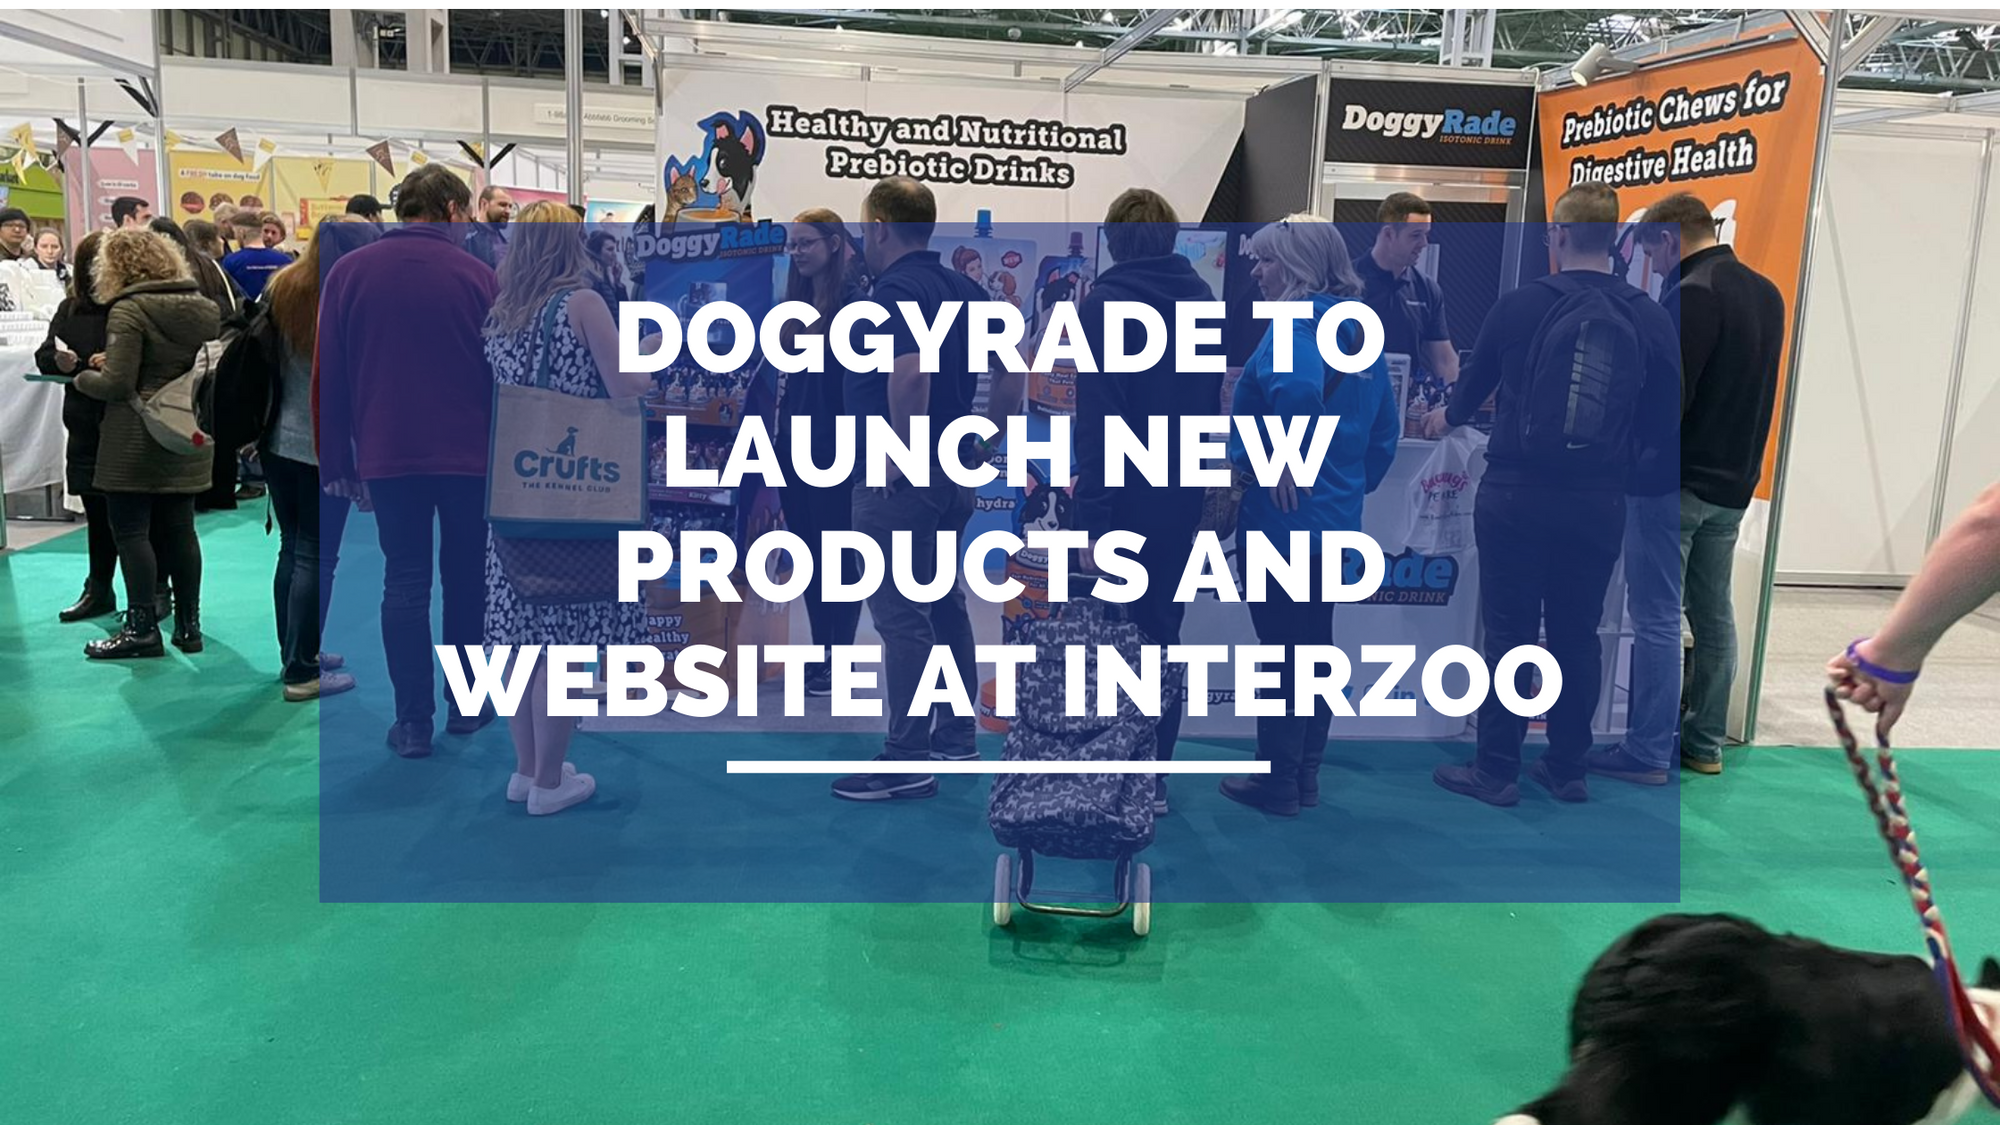 DoggyRade to Launch New Products and Website at Interzoo